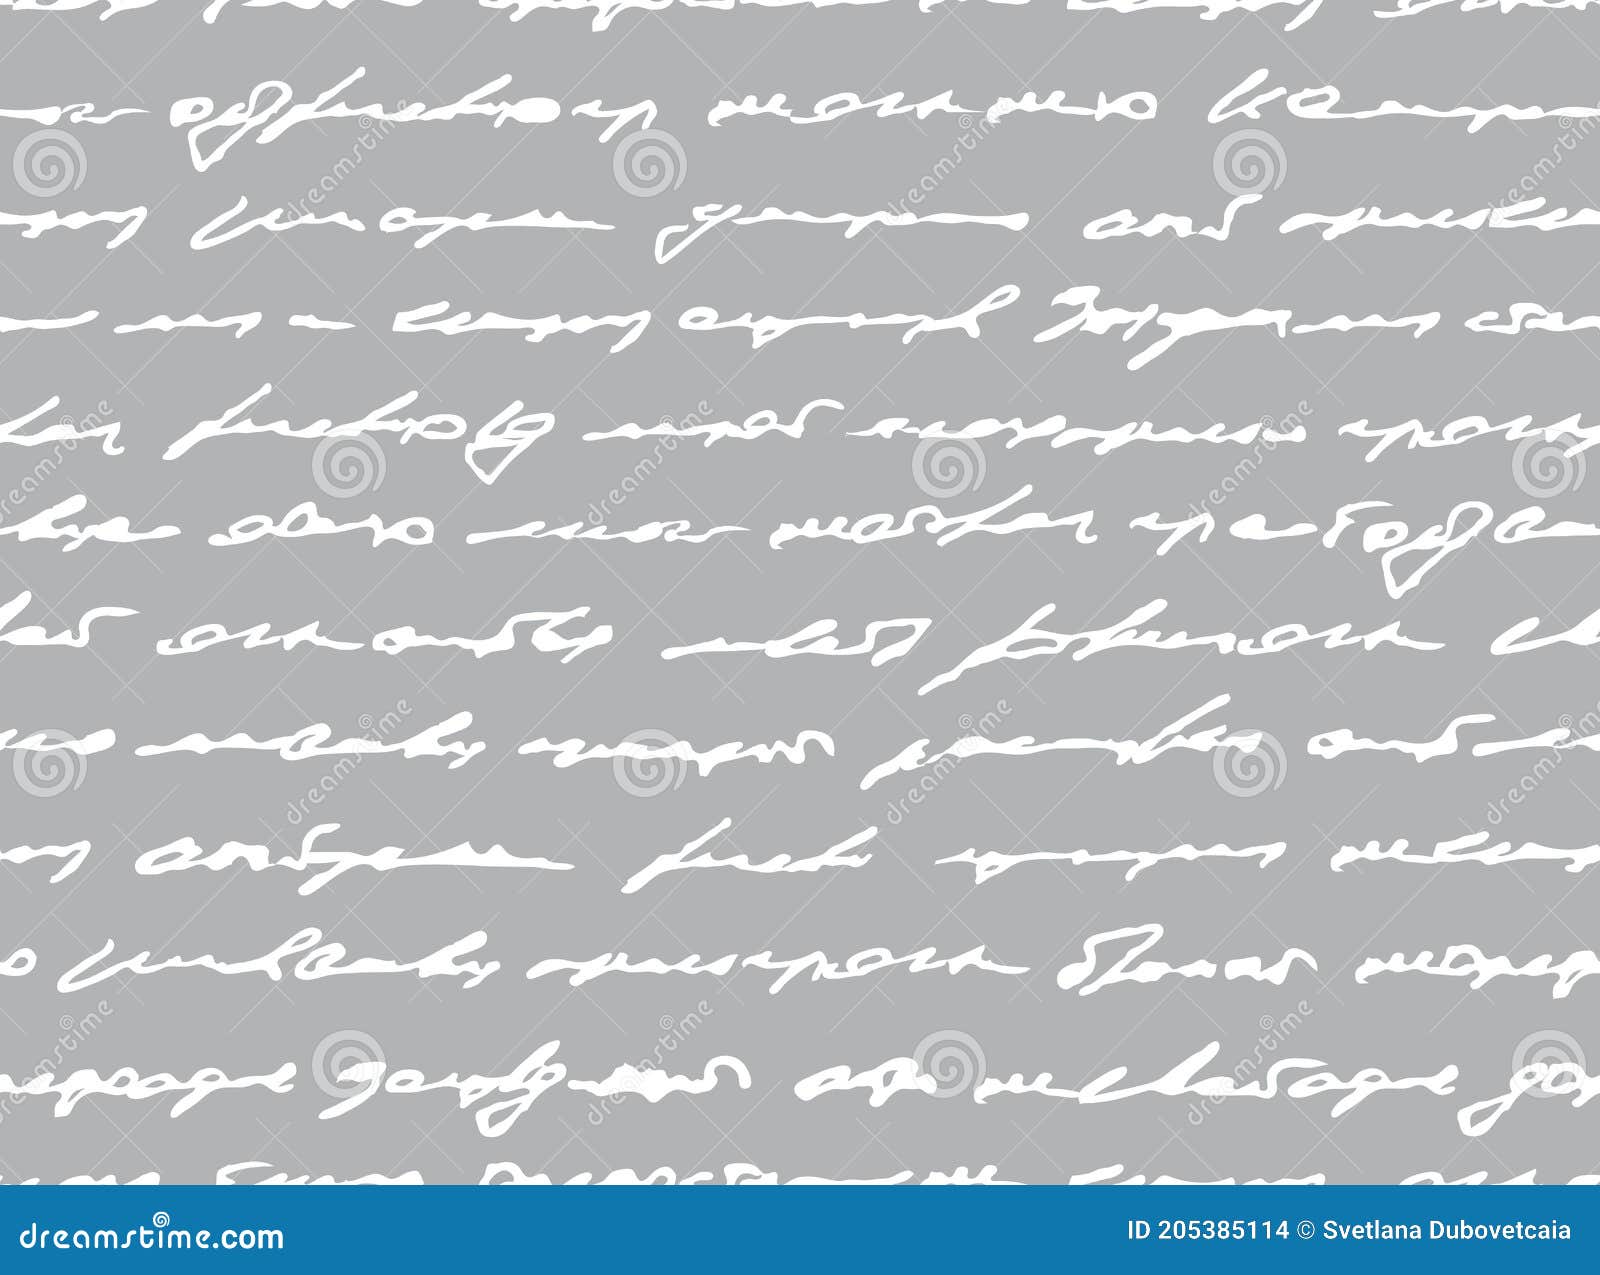  seamless pattern. imitation vintage lettering. indistinct handwriting. scribble text. unreadable background. written abstra